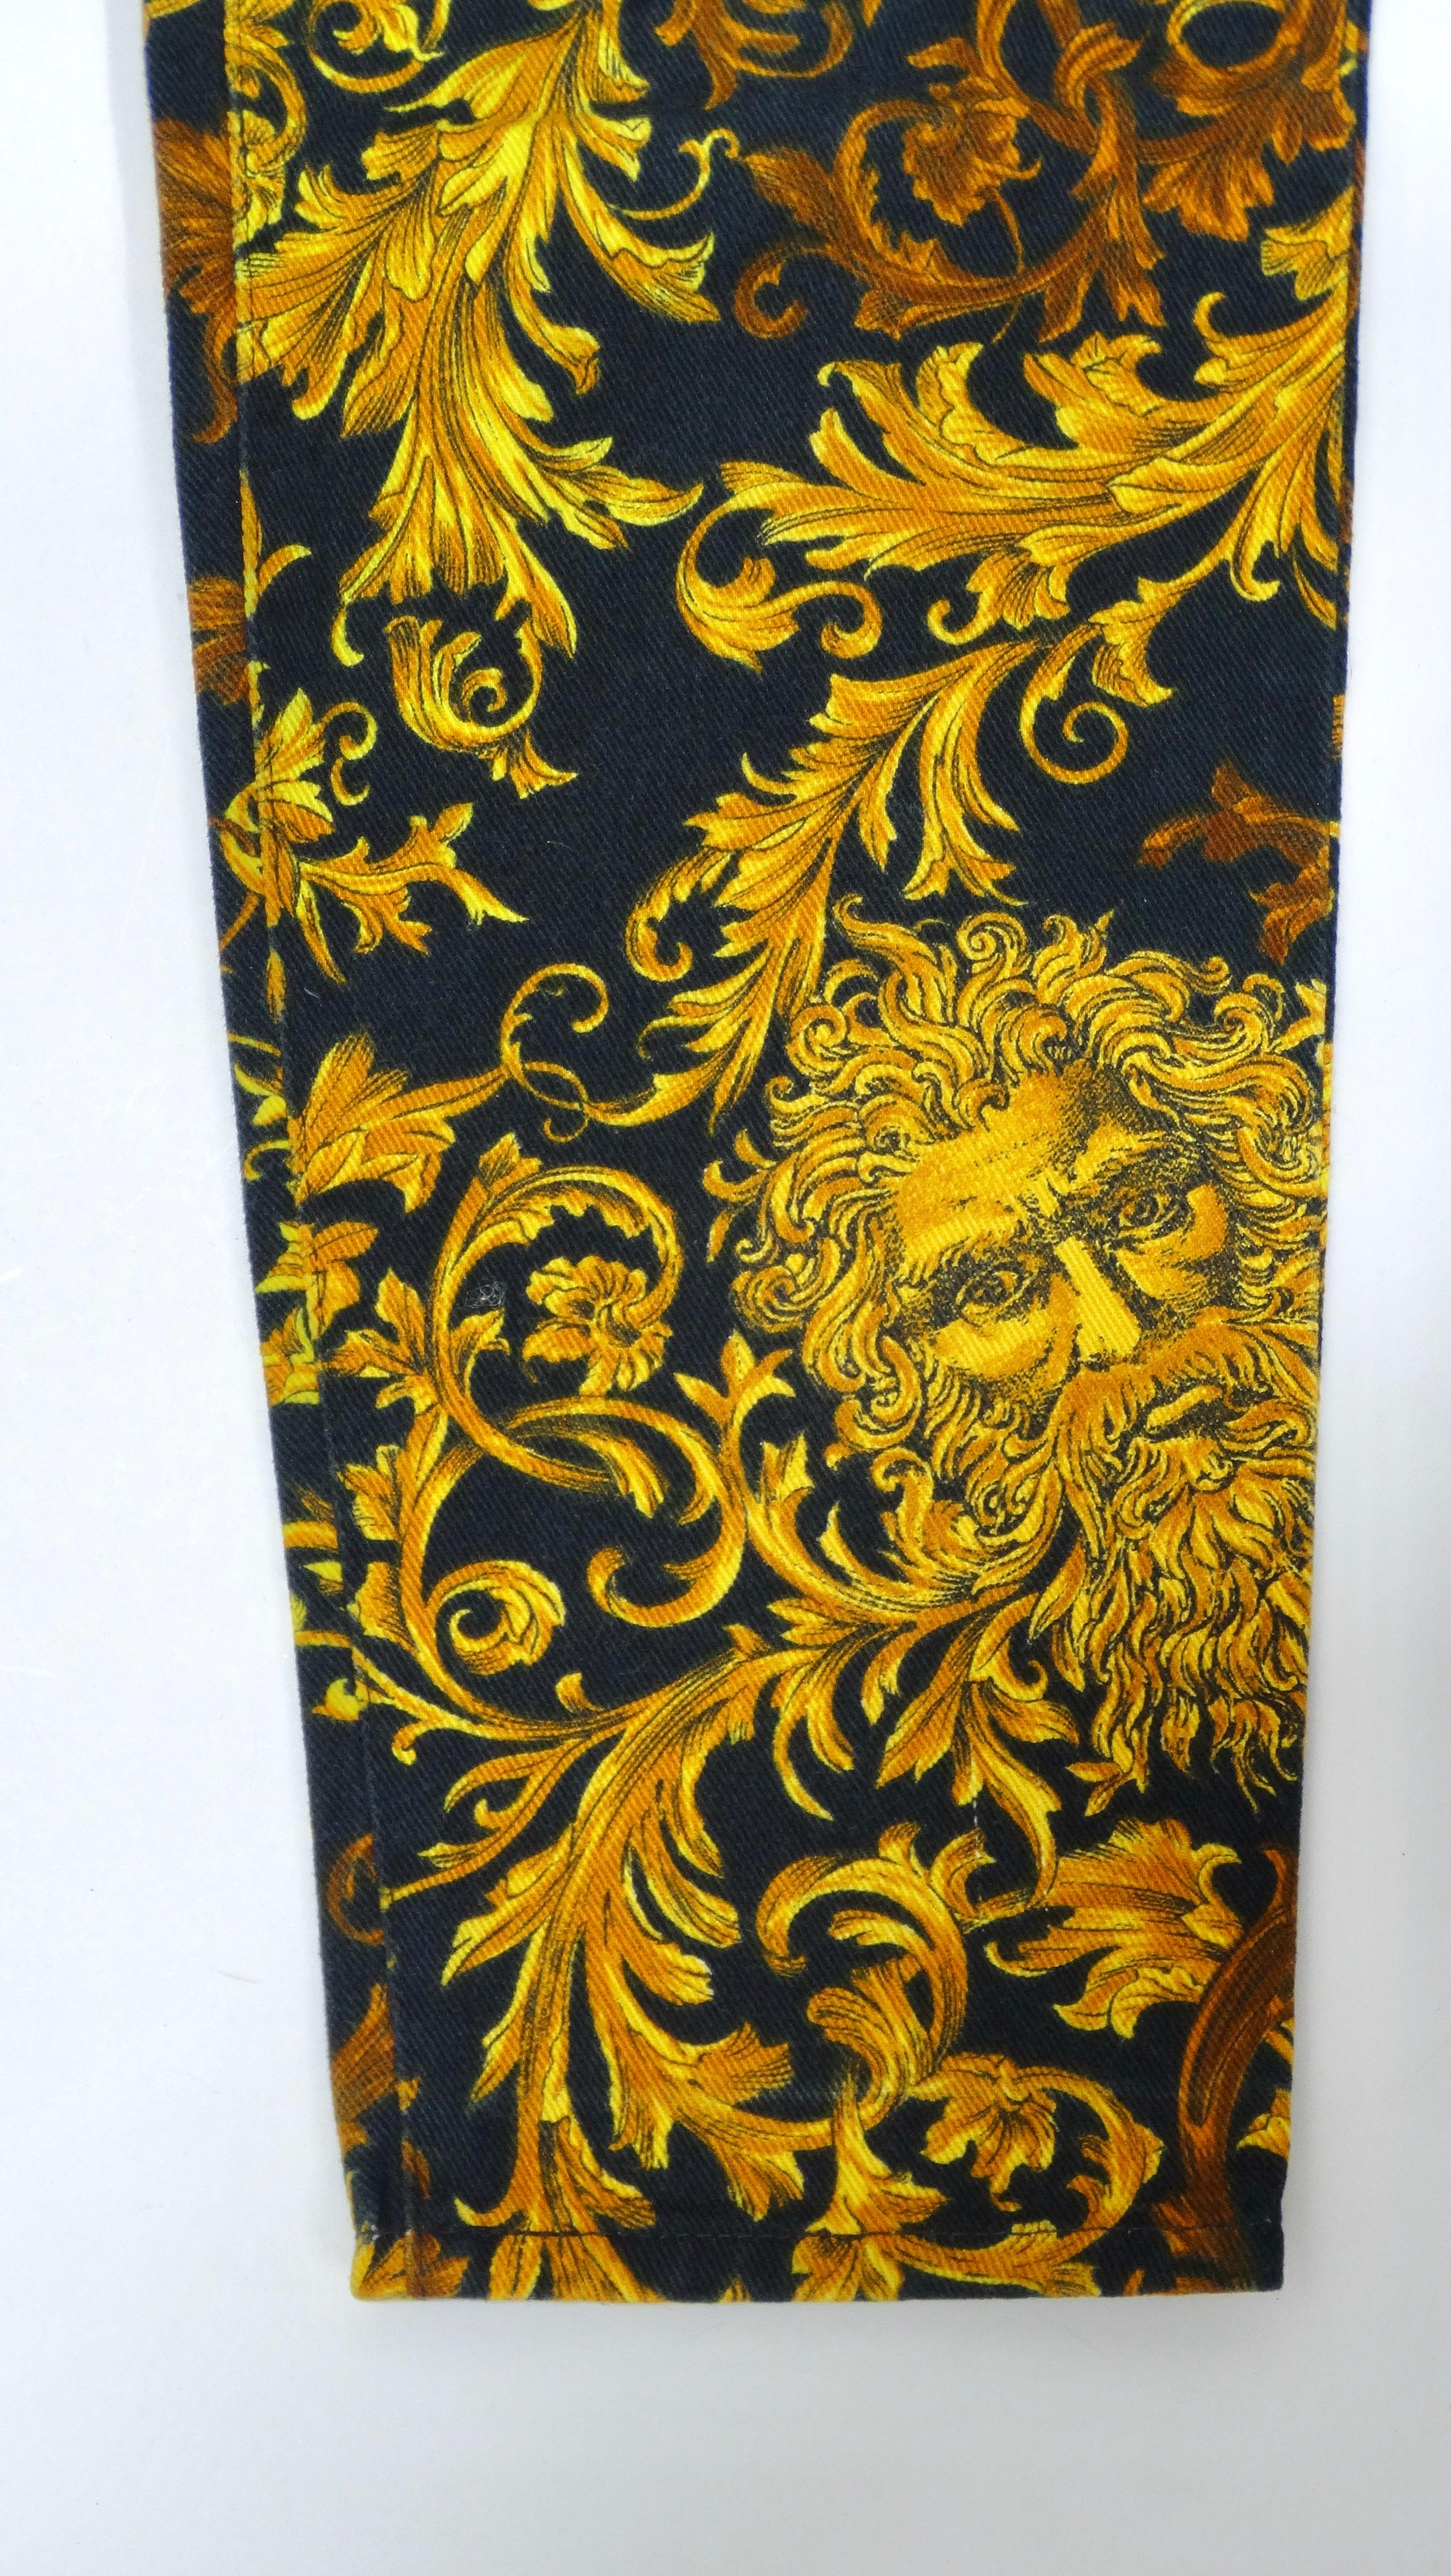 Versace Jeans Couture Baroque-Print Cropped Jeans In Excellent Condition For Sale In Scottsdale, AZ